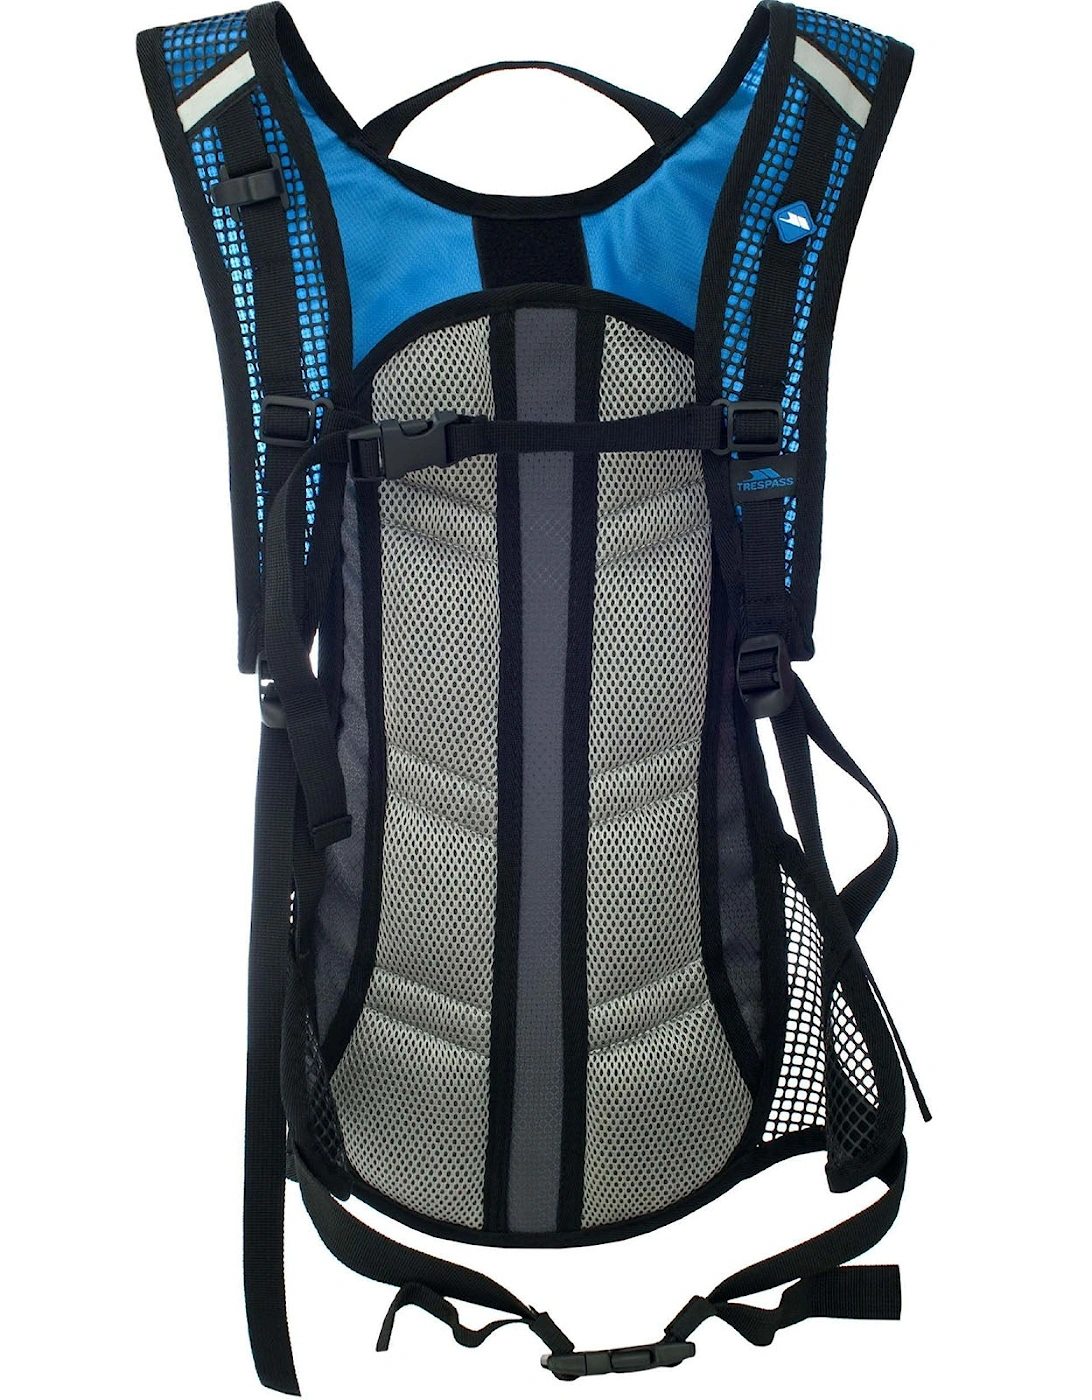 Mirror 15 Hydration Pack - Blue